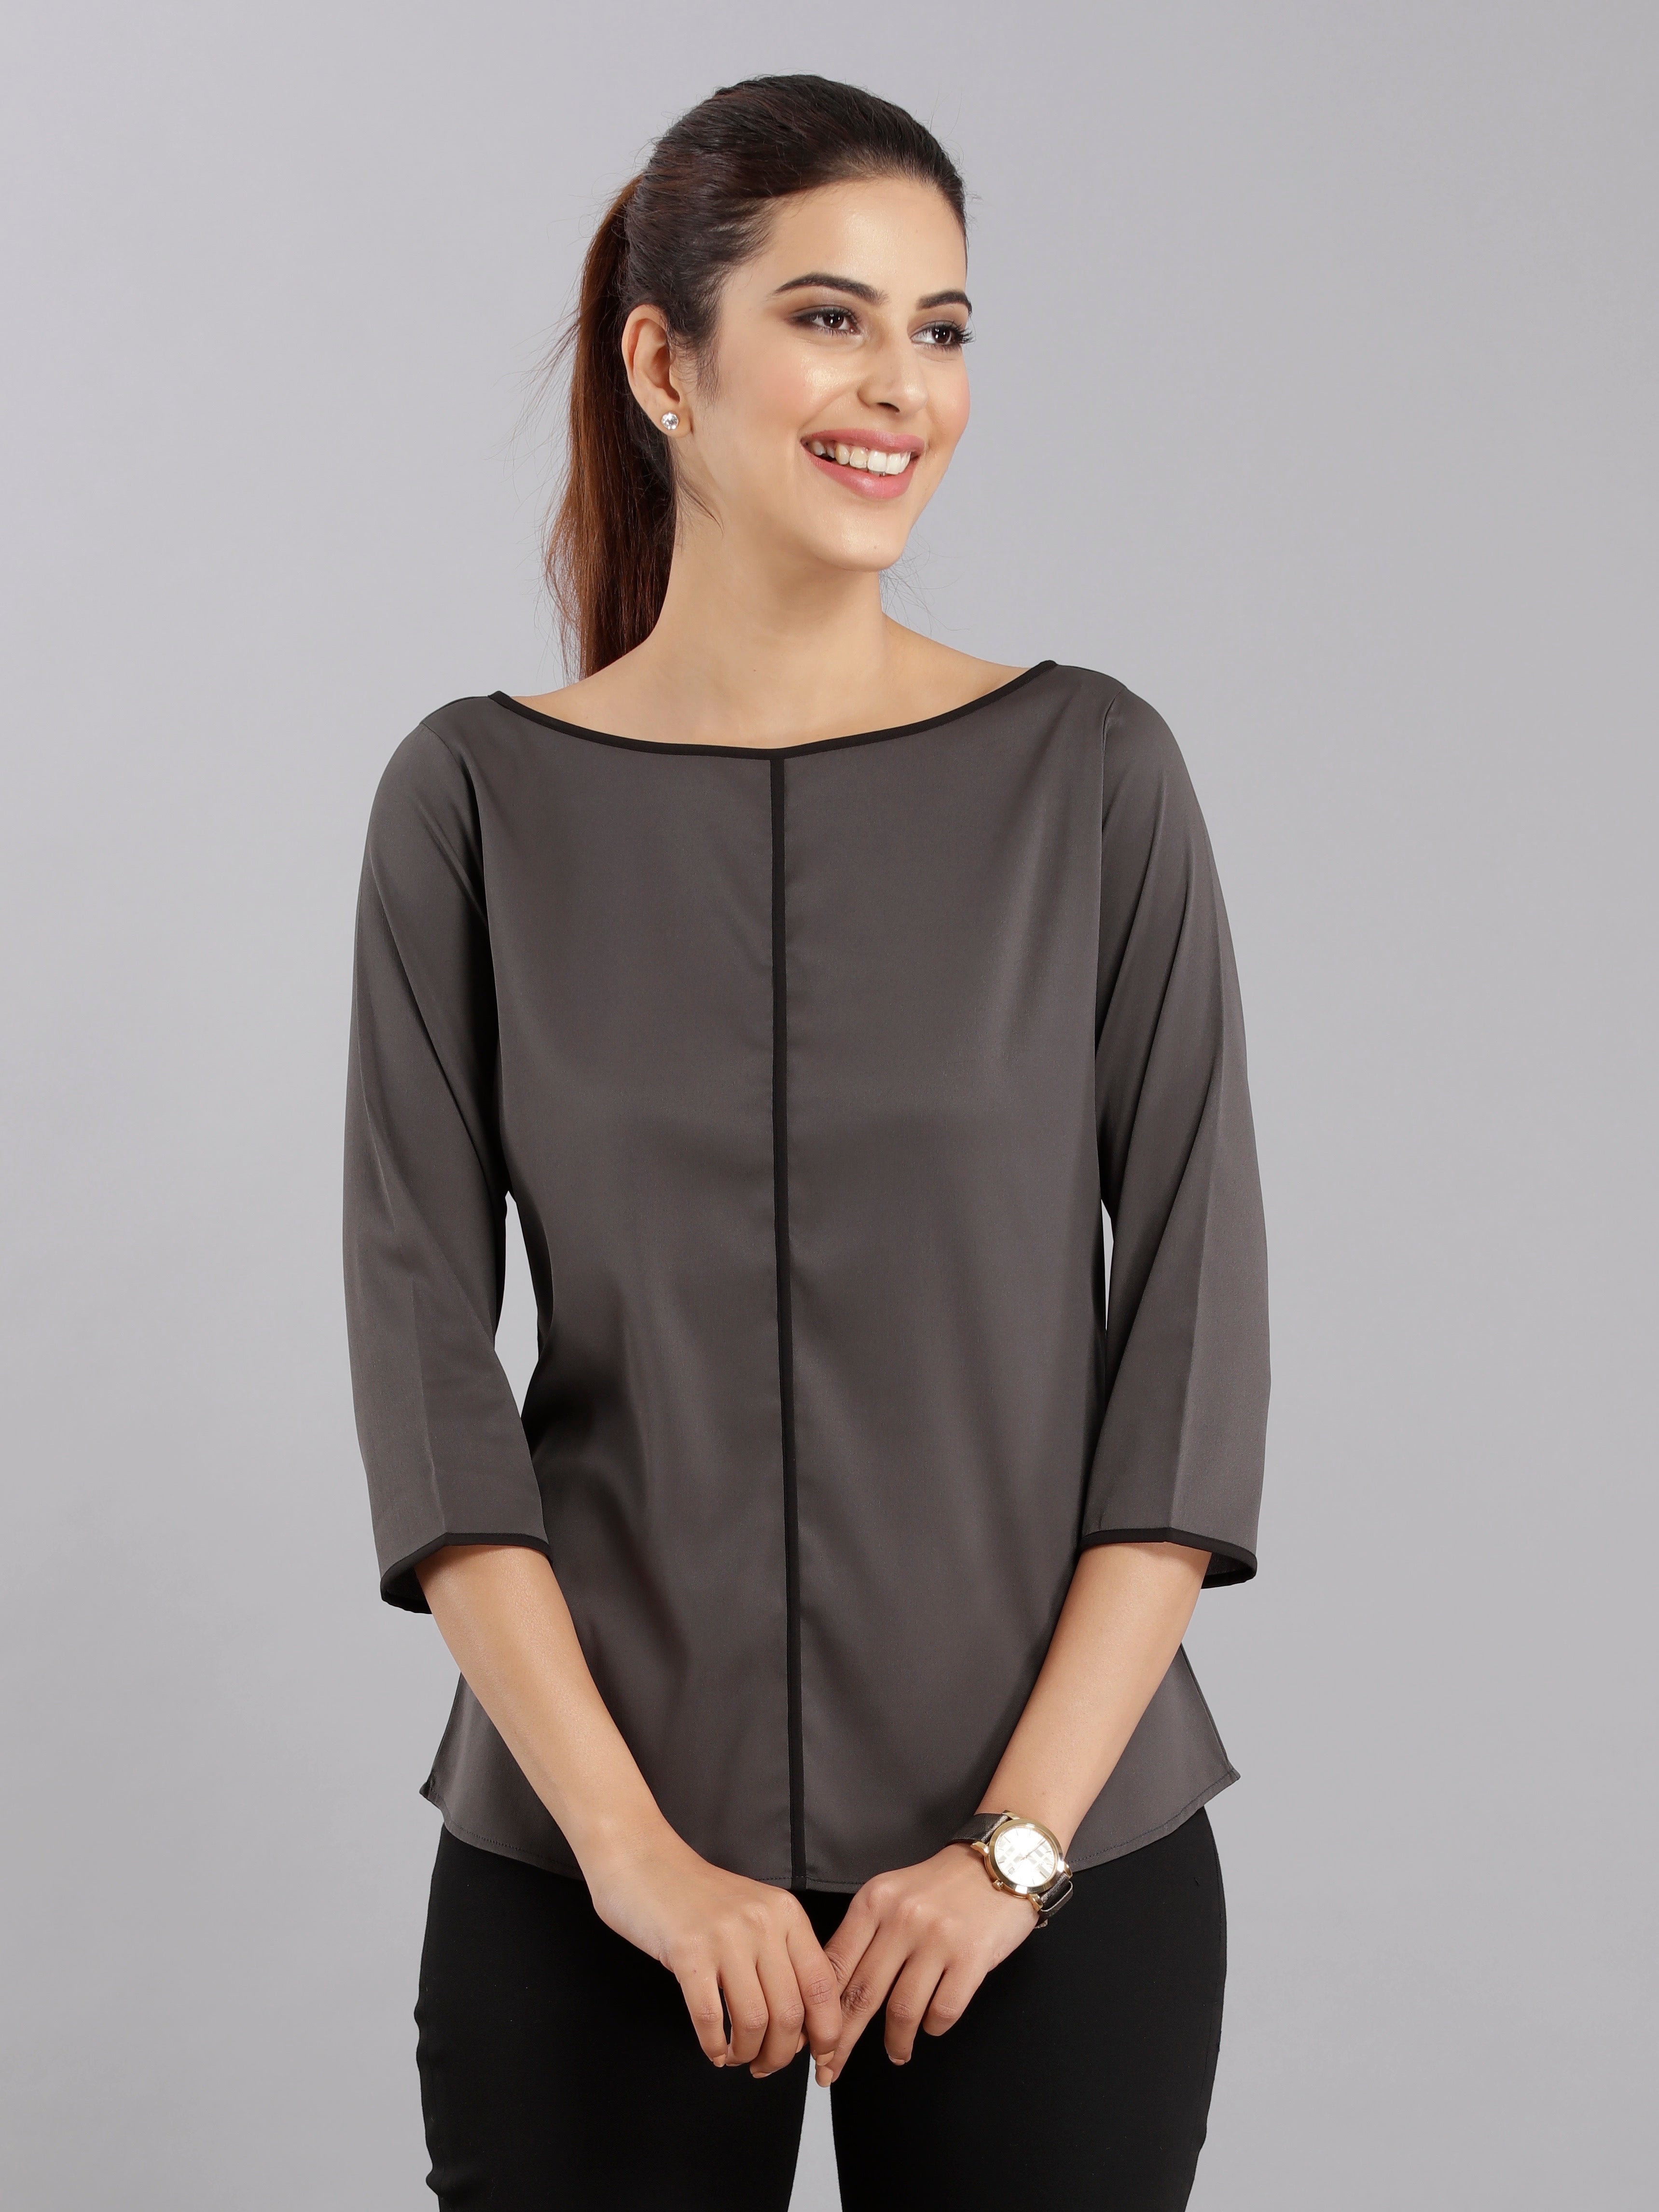 Office formal top, blouse, shirt by ...